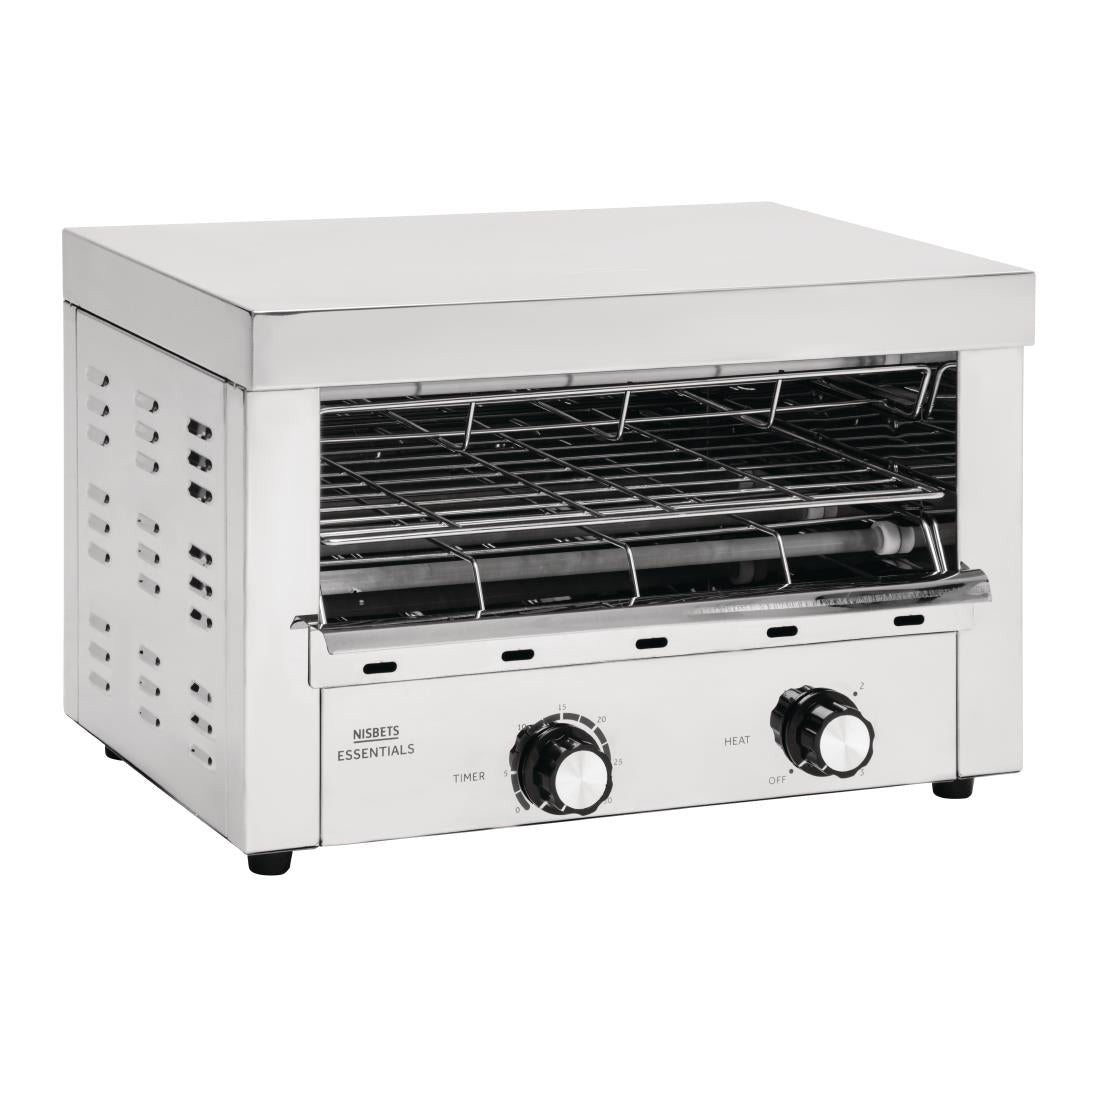 CT917 Nisbets Essentials Toaster Grill JD Catering Equipment Solutions Ltd